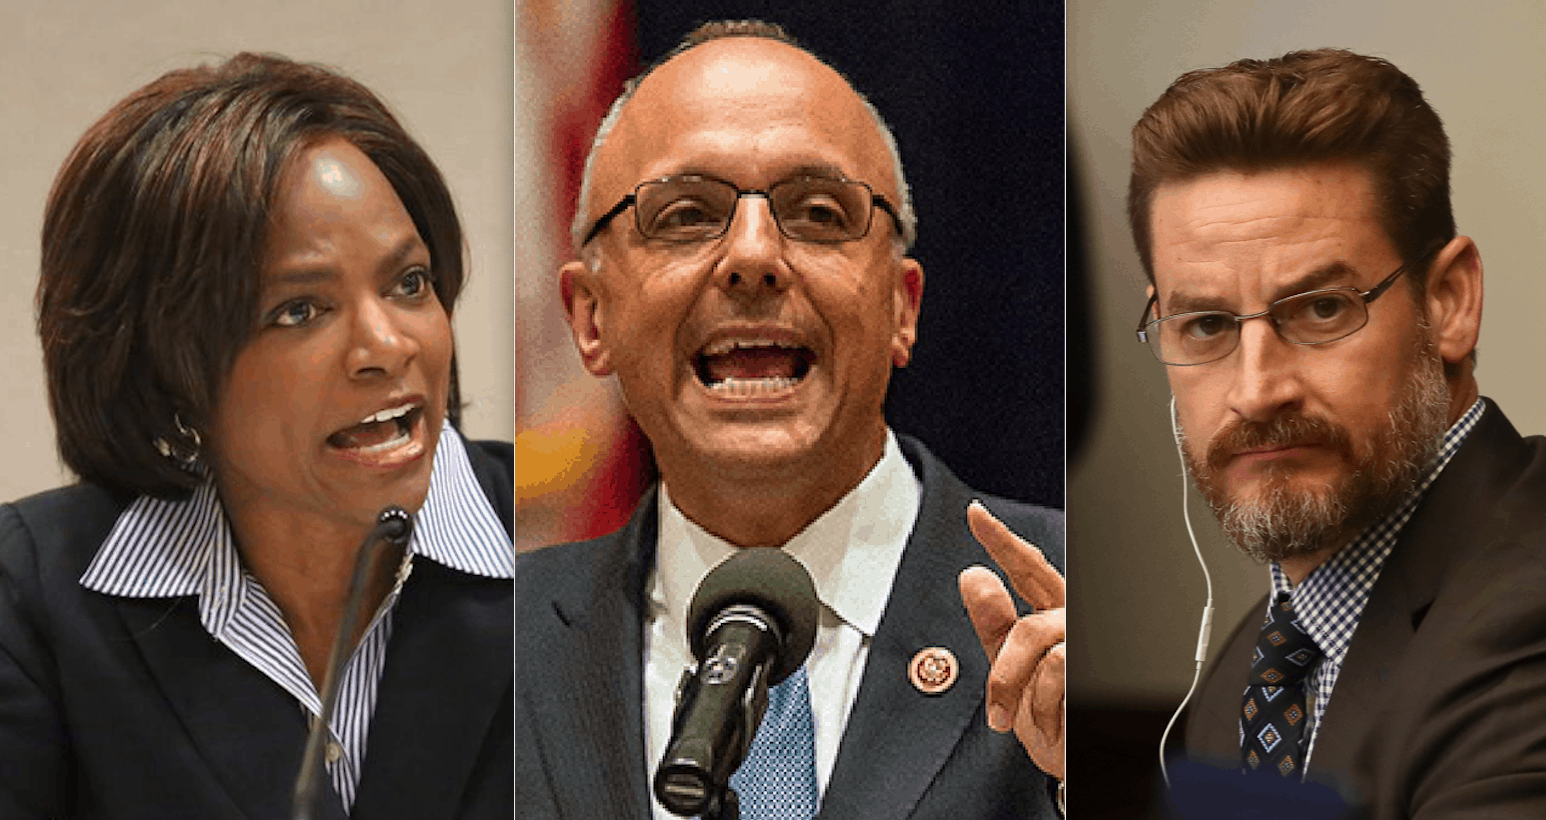 Val Demings, Ted Deutch and Greg Steube